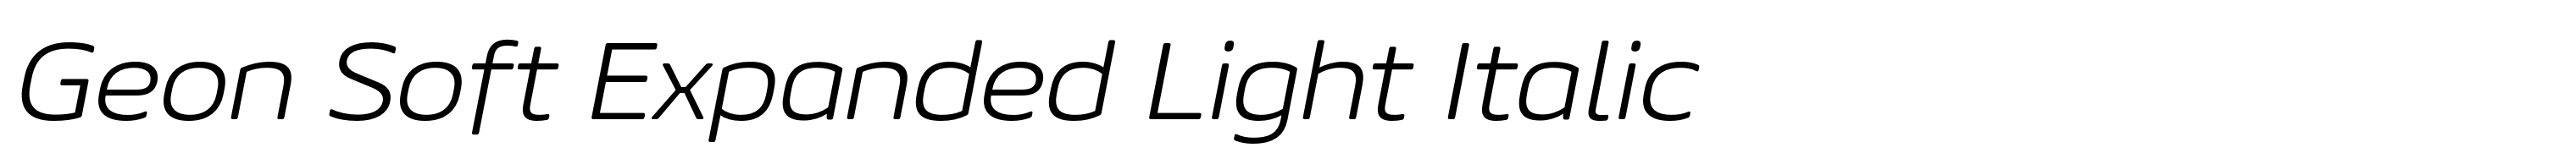 Geon Soft Expanded Light Italic